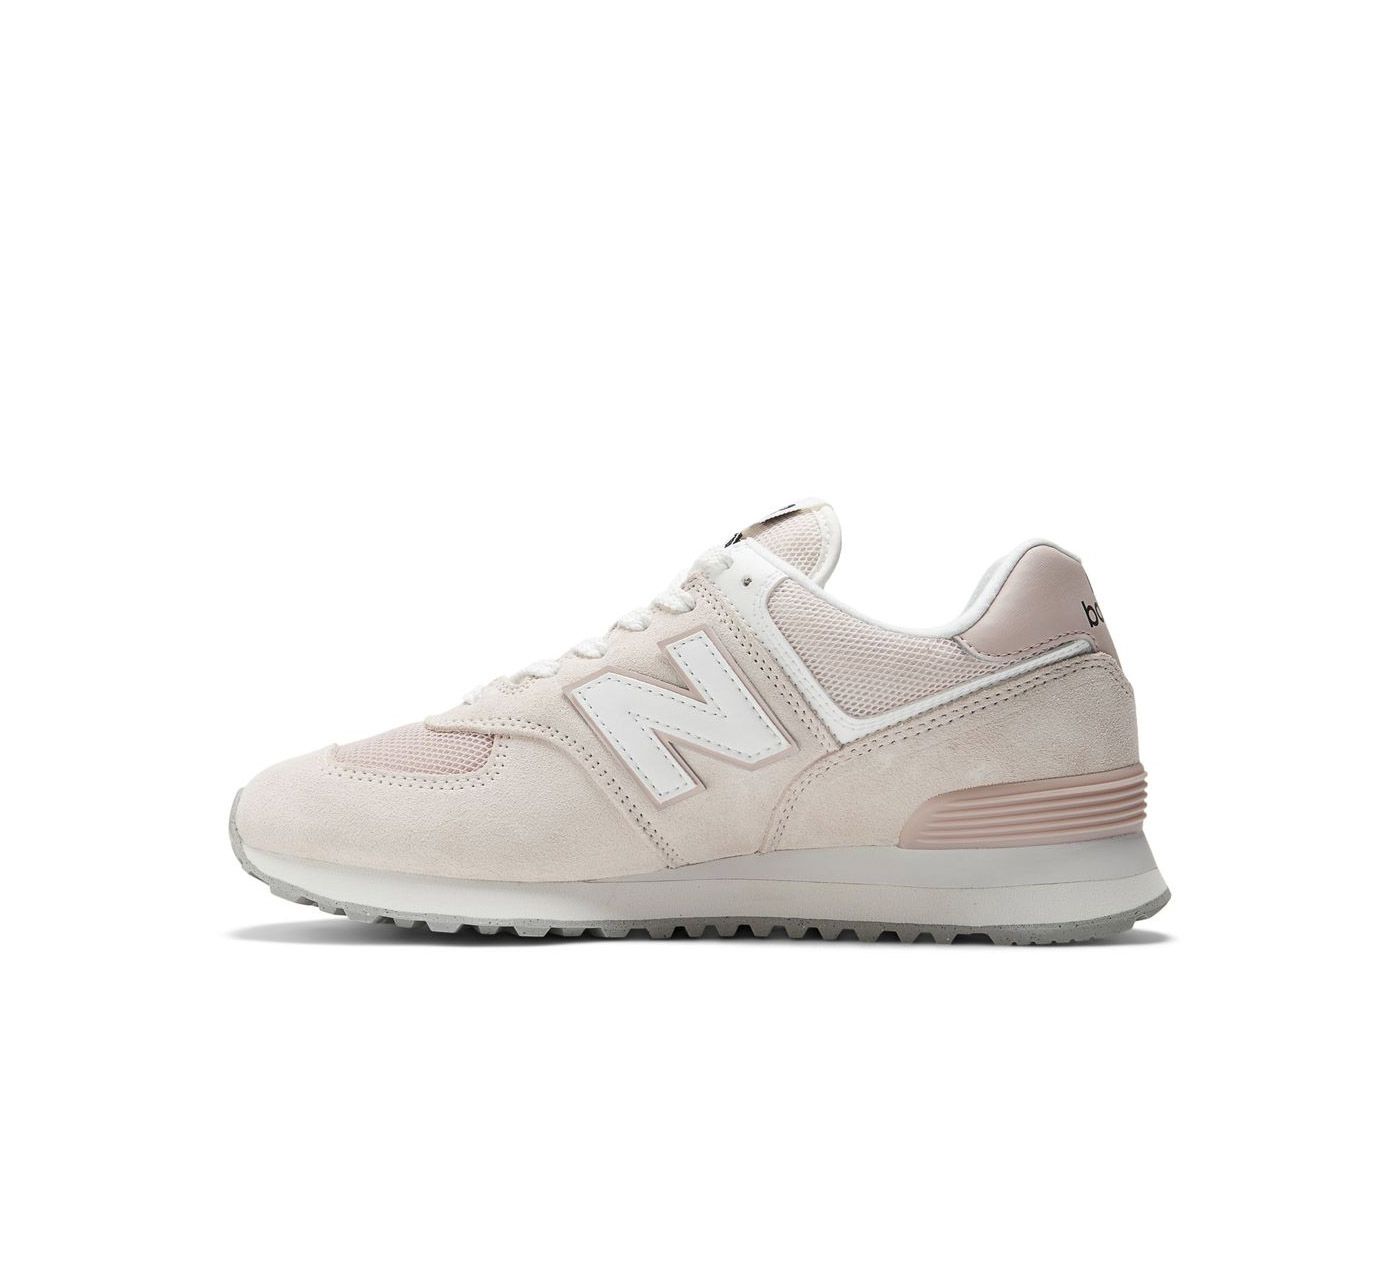 New Balance 574 trainers in light pink